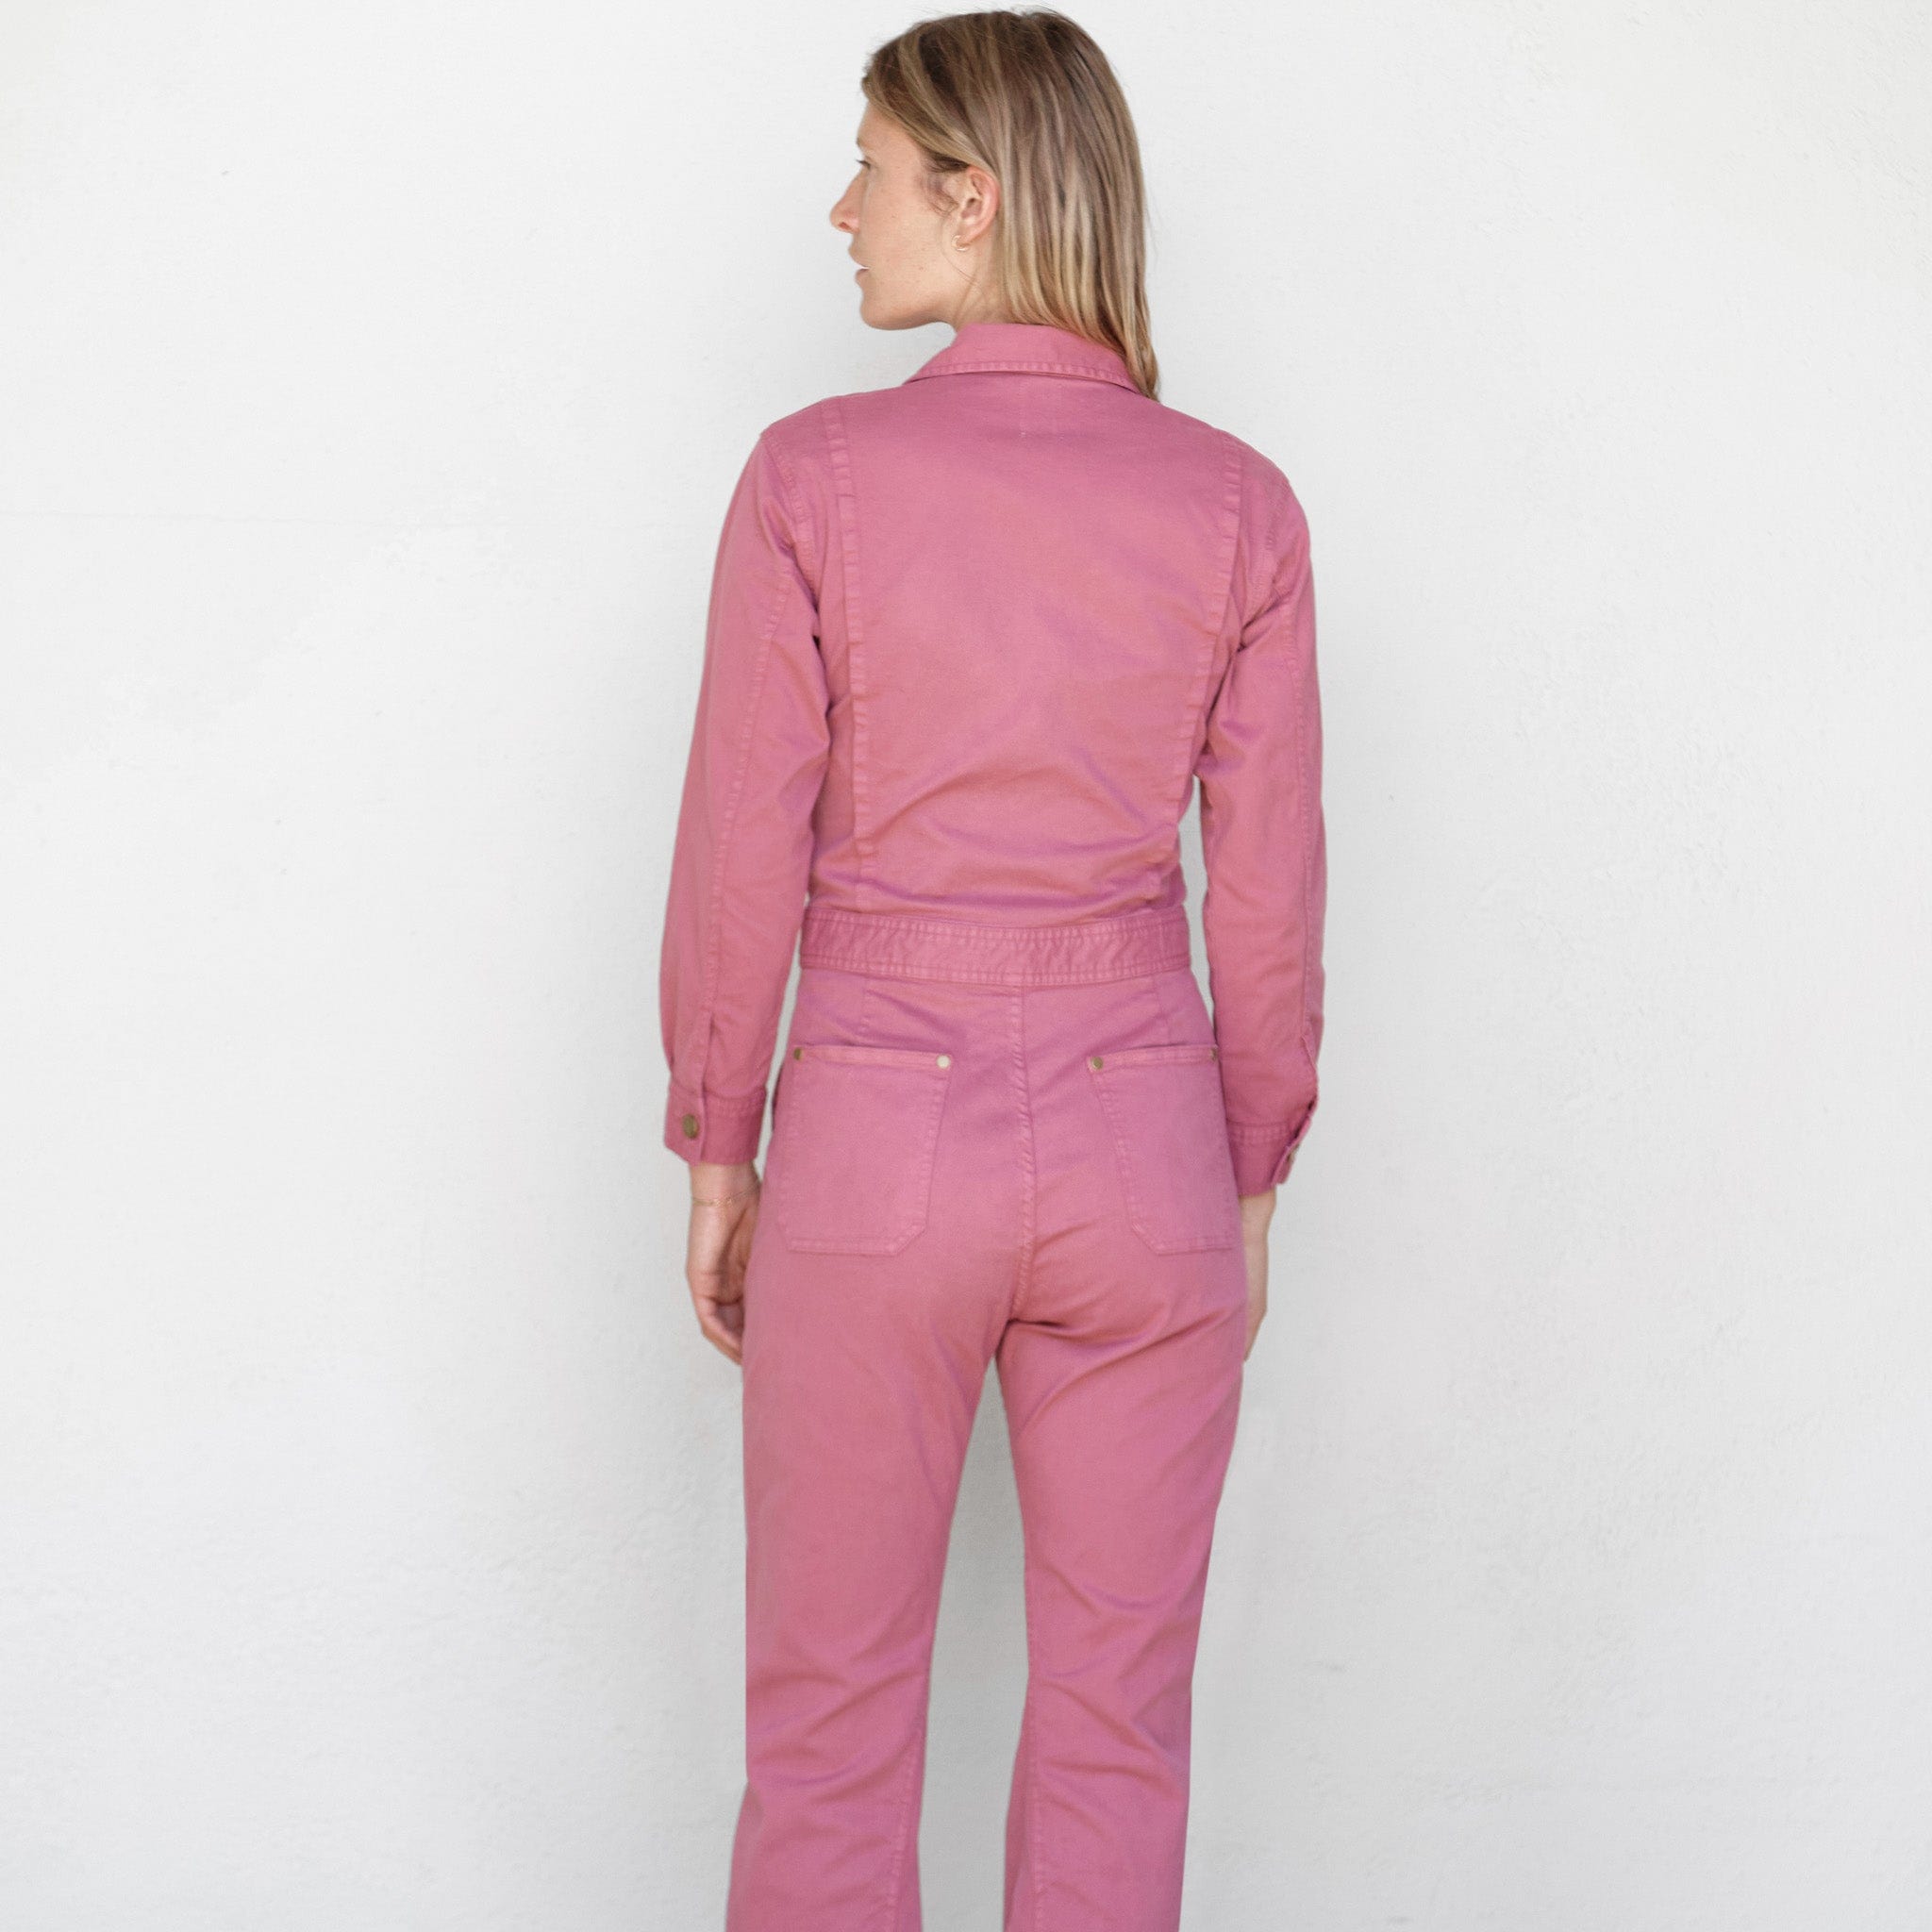 Only Jane Apparel Rose / 2 The Only Jane Jumpsuit